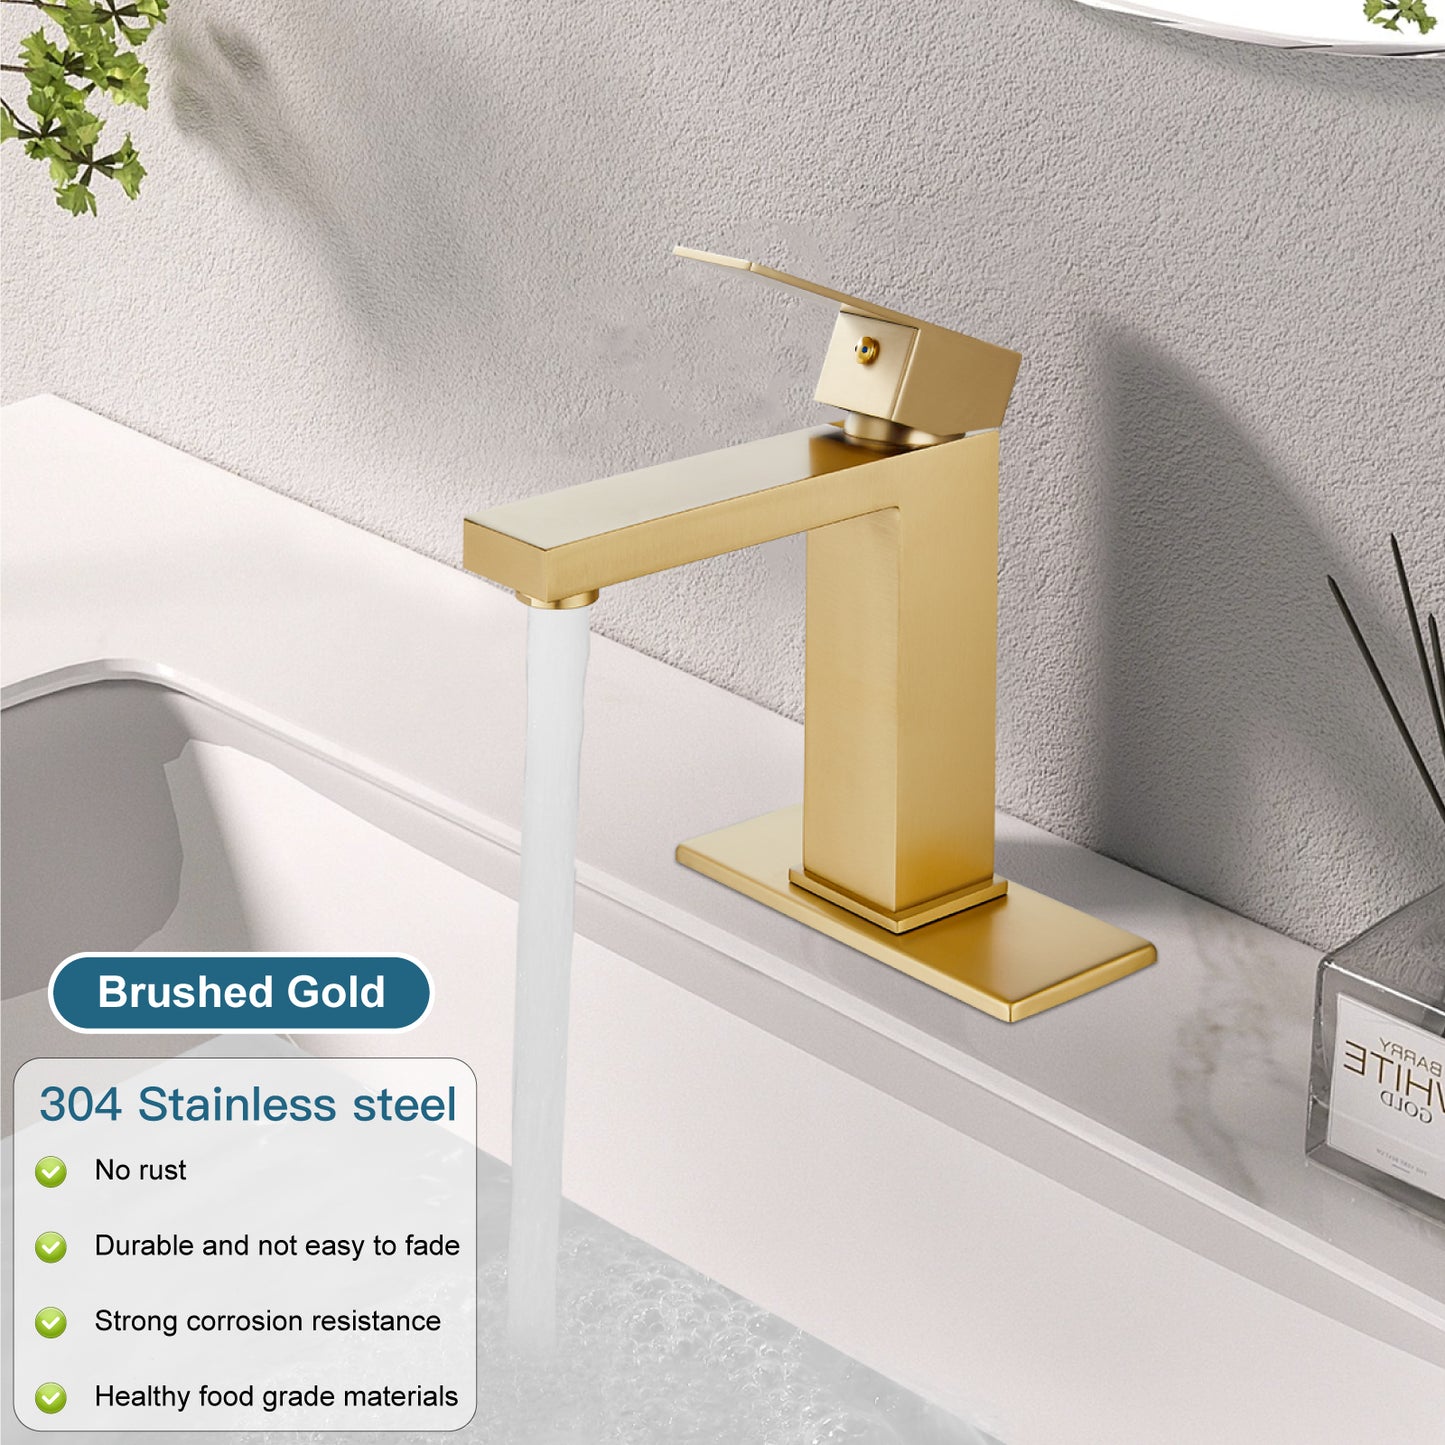 
                  
                    Midanya  Bathroom Faucet Single Handle Lavatory Vanity Sink Faucet with Pop Up Drain Stopper, Cover Plate and Water Supply Line Stainless Steel Mixing Tap for Bathroom Sink
                  
                